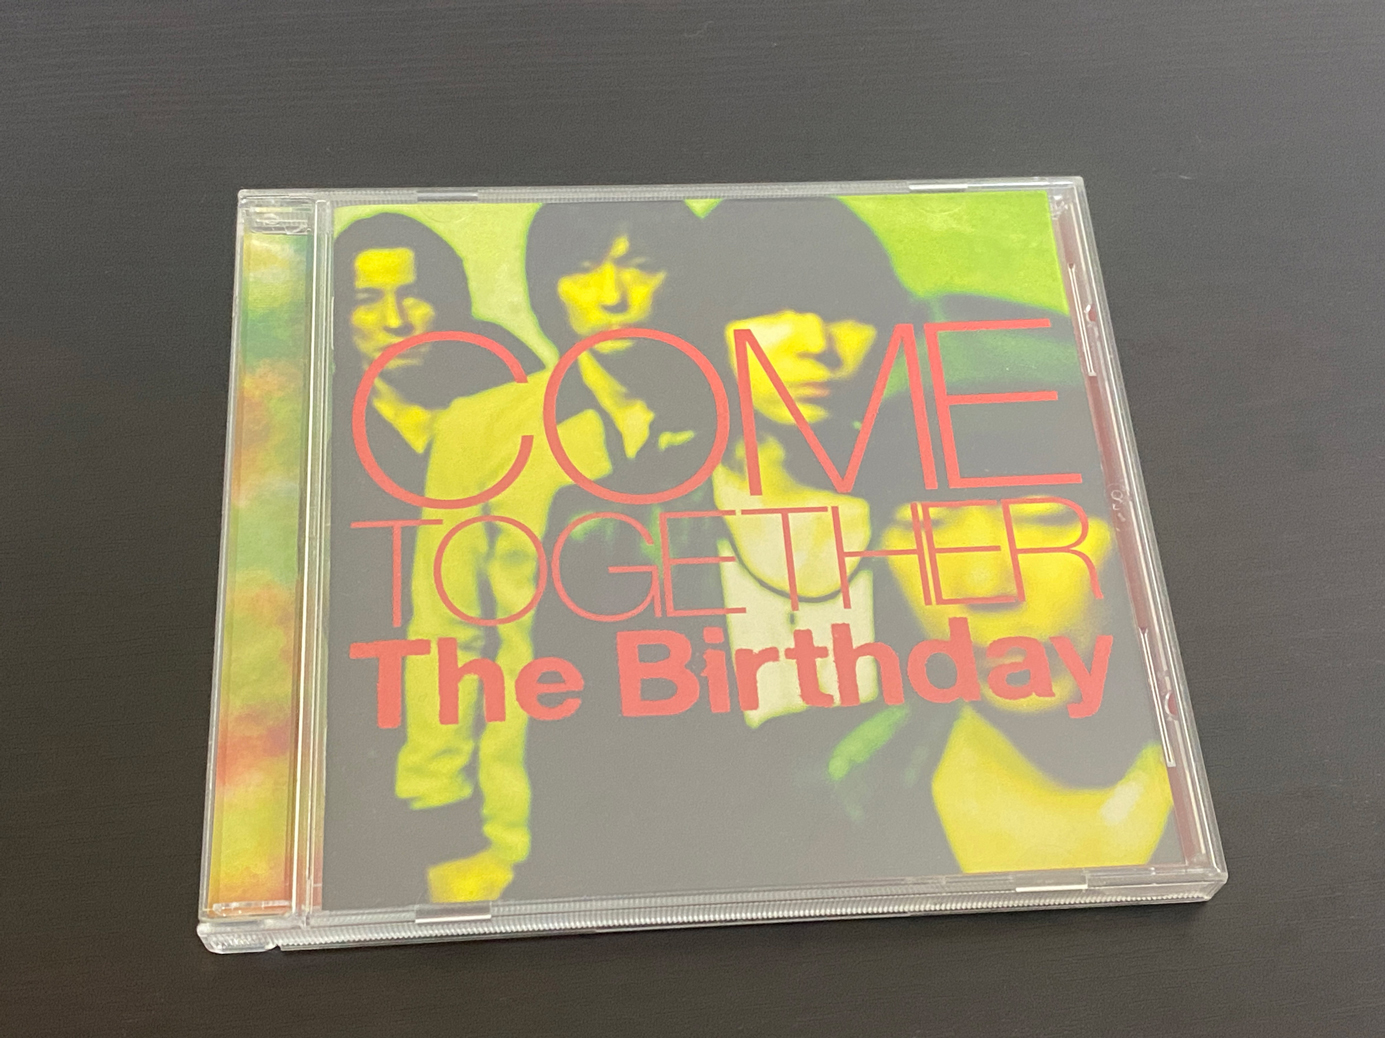 The Birthday「COME TOGETHER」のジャケット